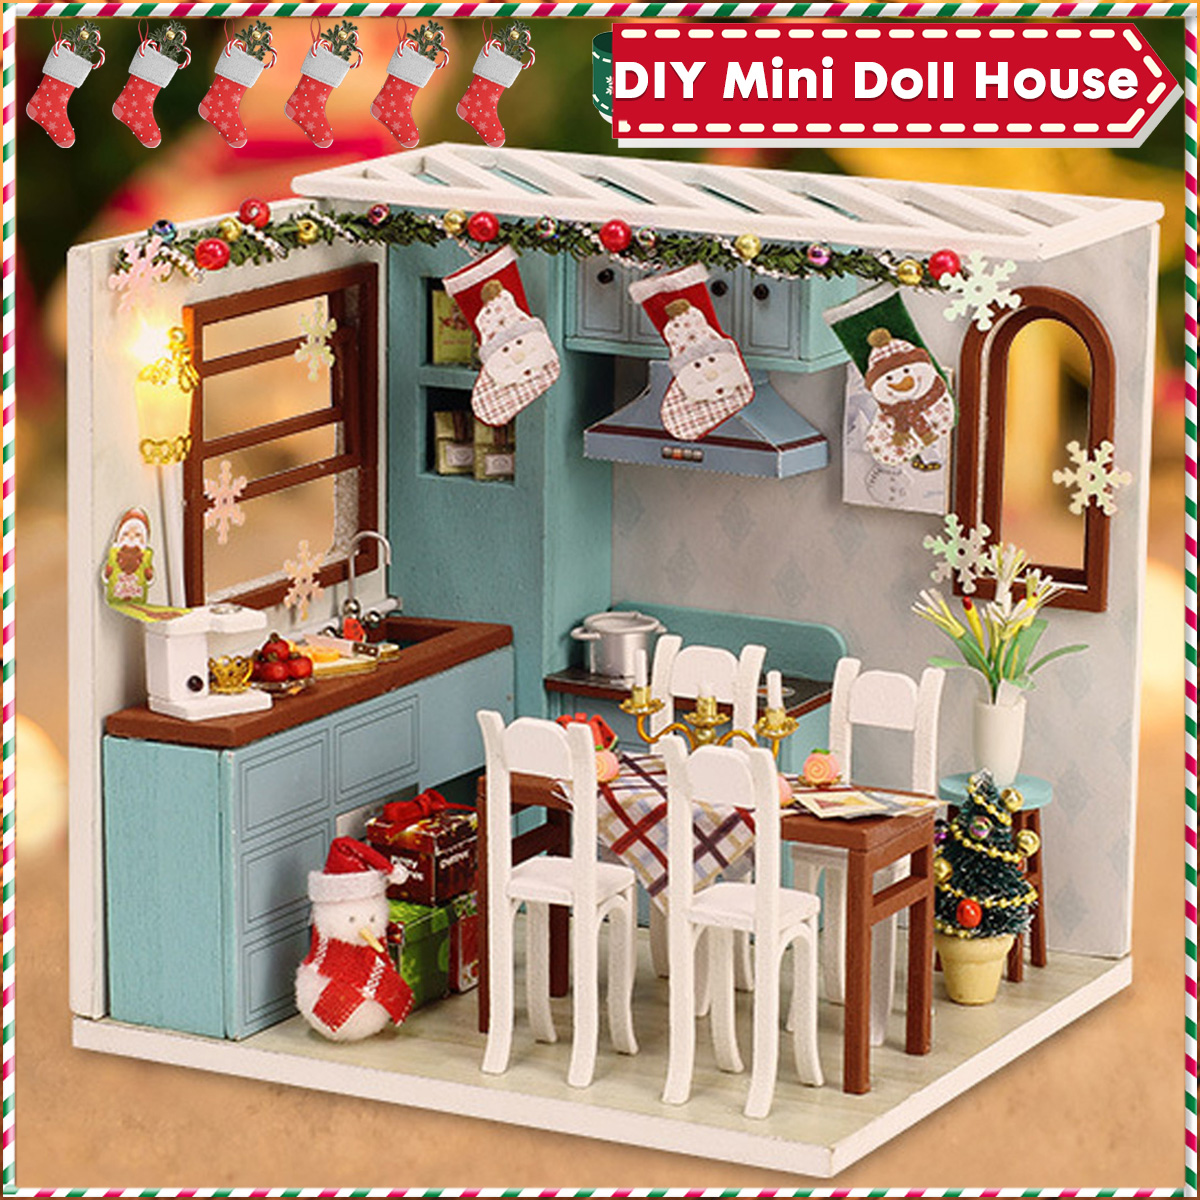 Wooden-Dining-Room-DIY-Handmade-Assemble-Doll-House-Miniature-Furniture-Kit-Education-Toy-with-LED-L-1737848-1